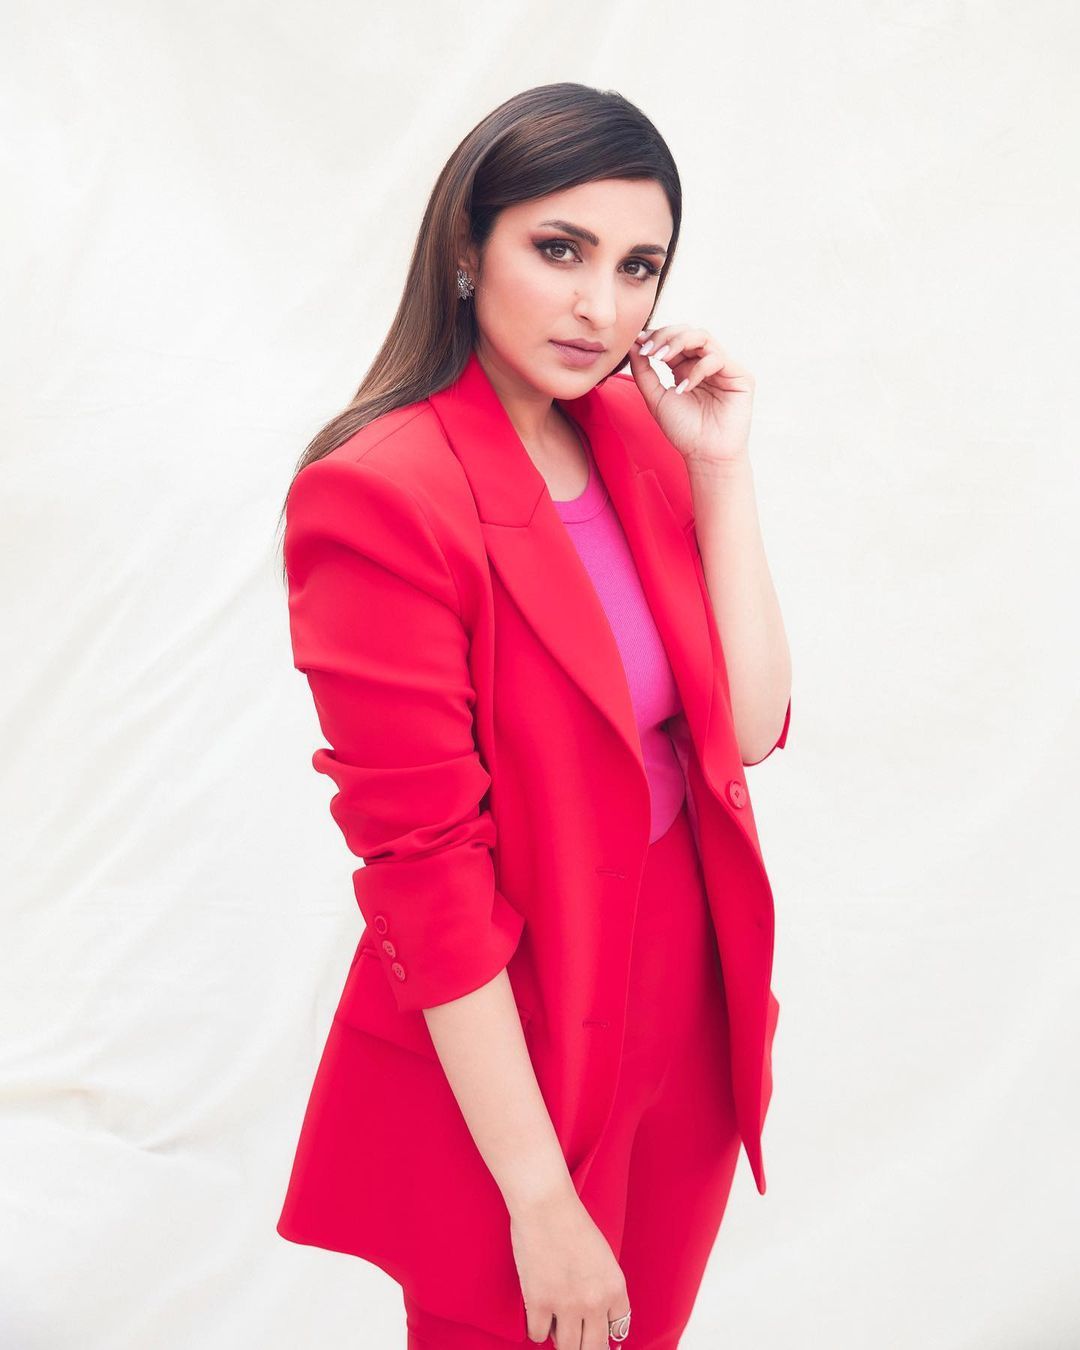 Parineeti Chopra Actress Celebrity Business Suit Office Girl Looking At Viewer White Background Indi 1080x1350